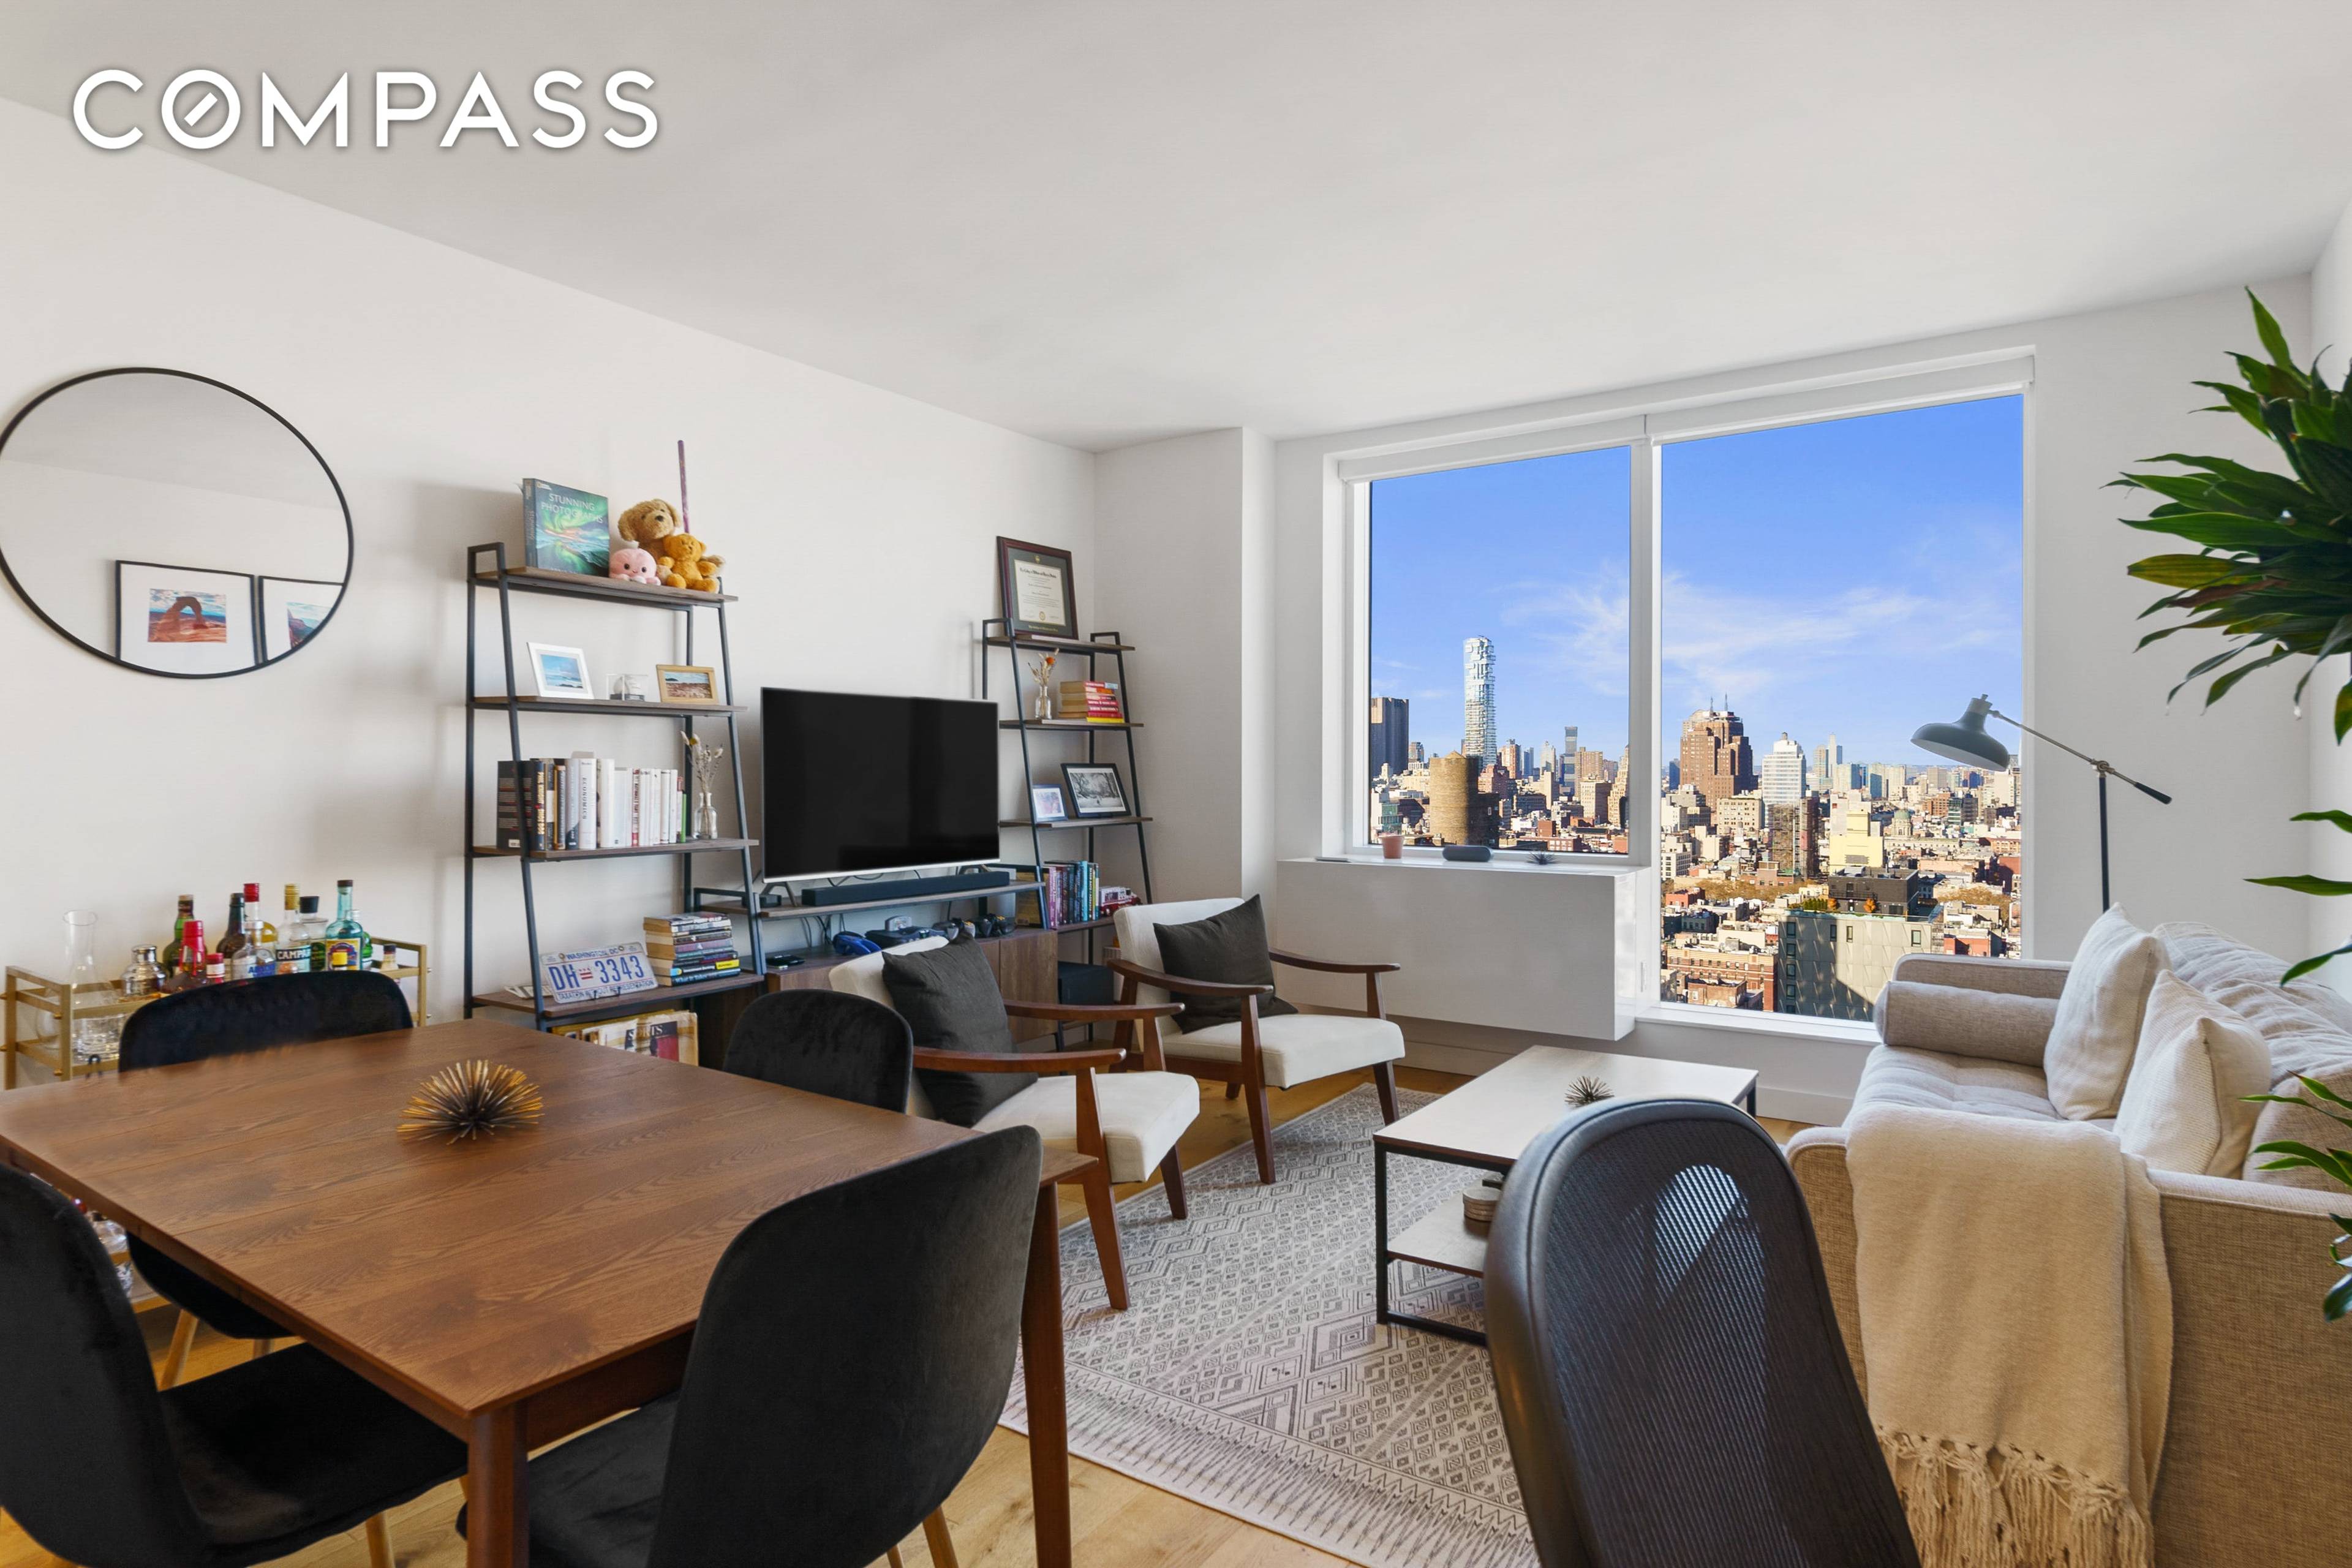 Welcome to Residence 2306, 23 stories above Manhattan with unobstructed views of one world trade center, Williamsburg bridge and beautiful sunsets.